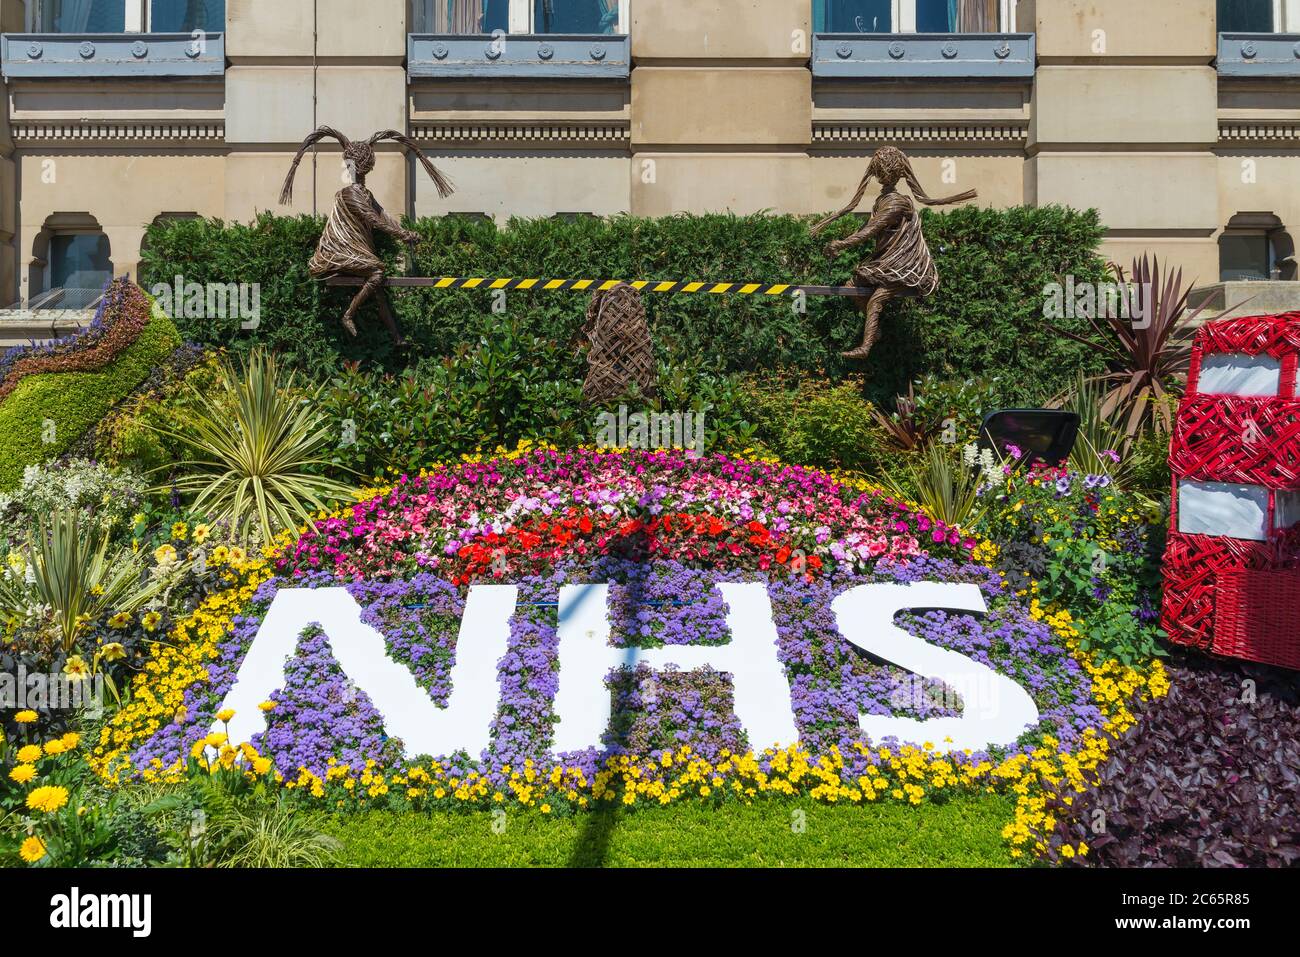 Flower display in Birmingham saying thank-you NHS which used plants destined for the Chelsea Flower Show by Birmingham Parks Department Stock Photo